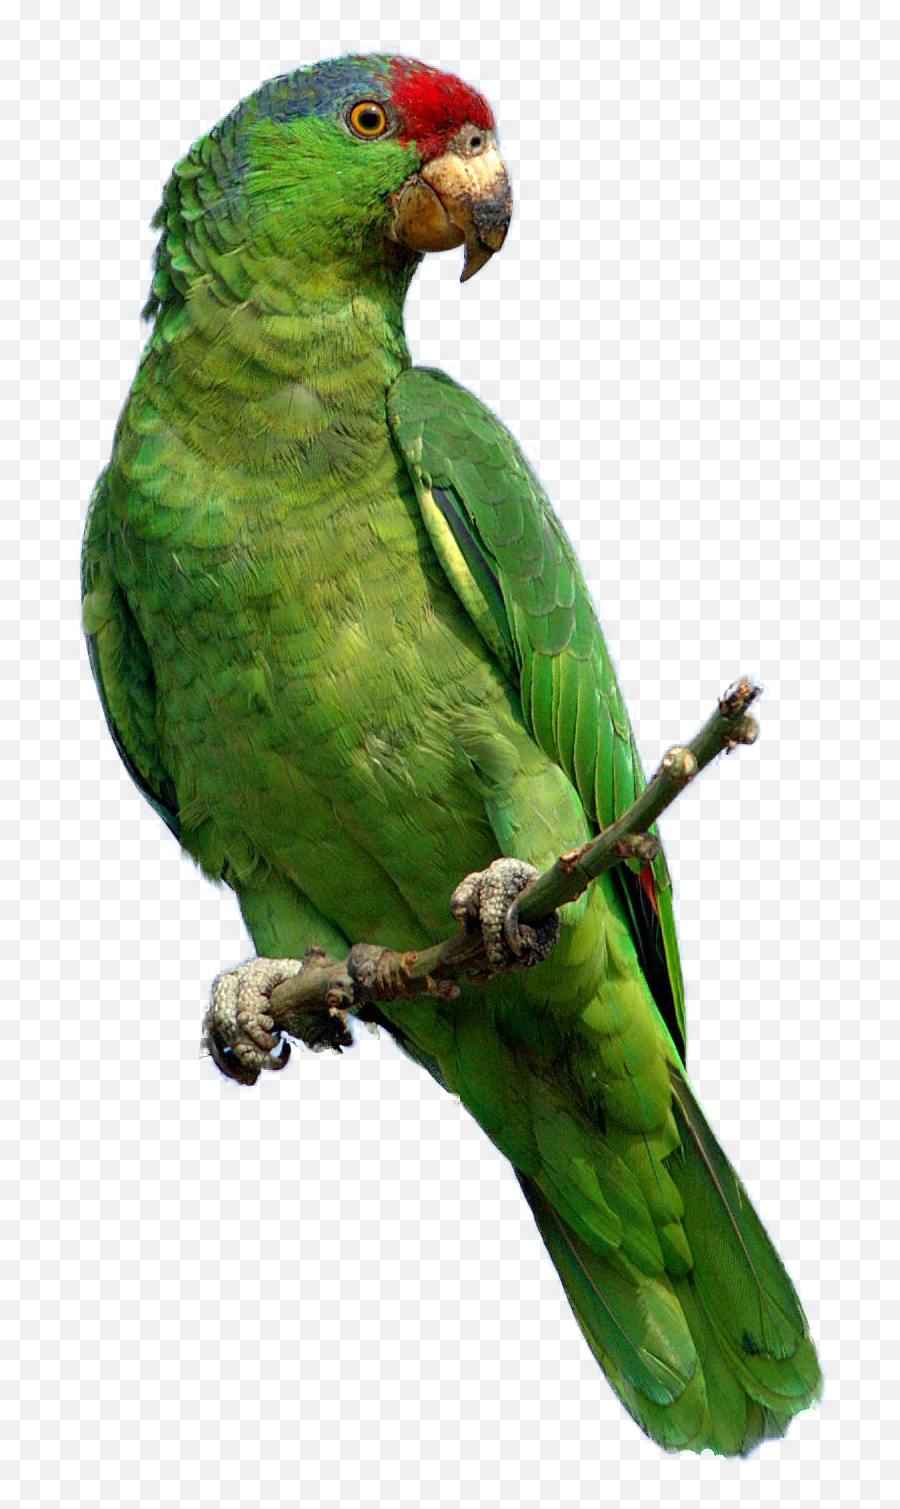 Download Free Png Background - Parrotgreentransparent Parrot Png,Green Transparent Background